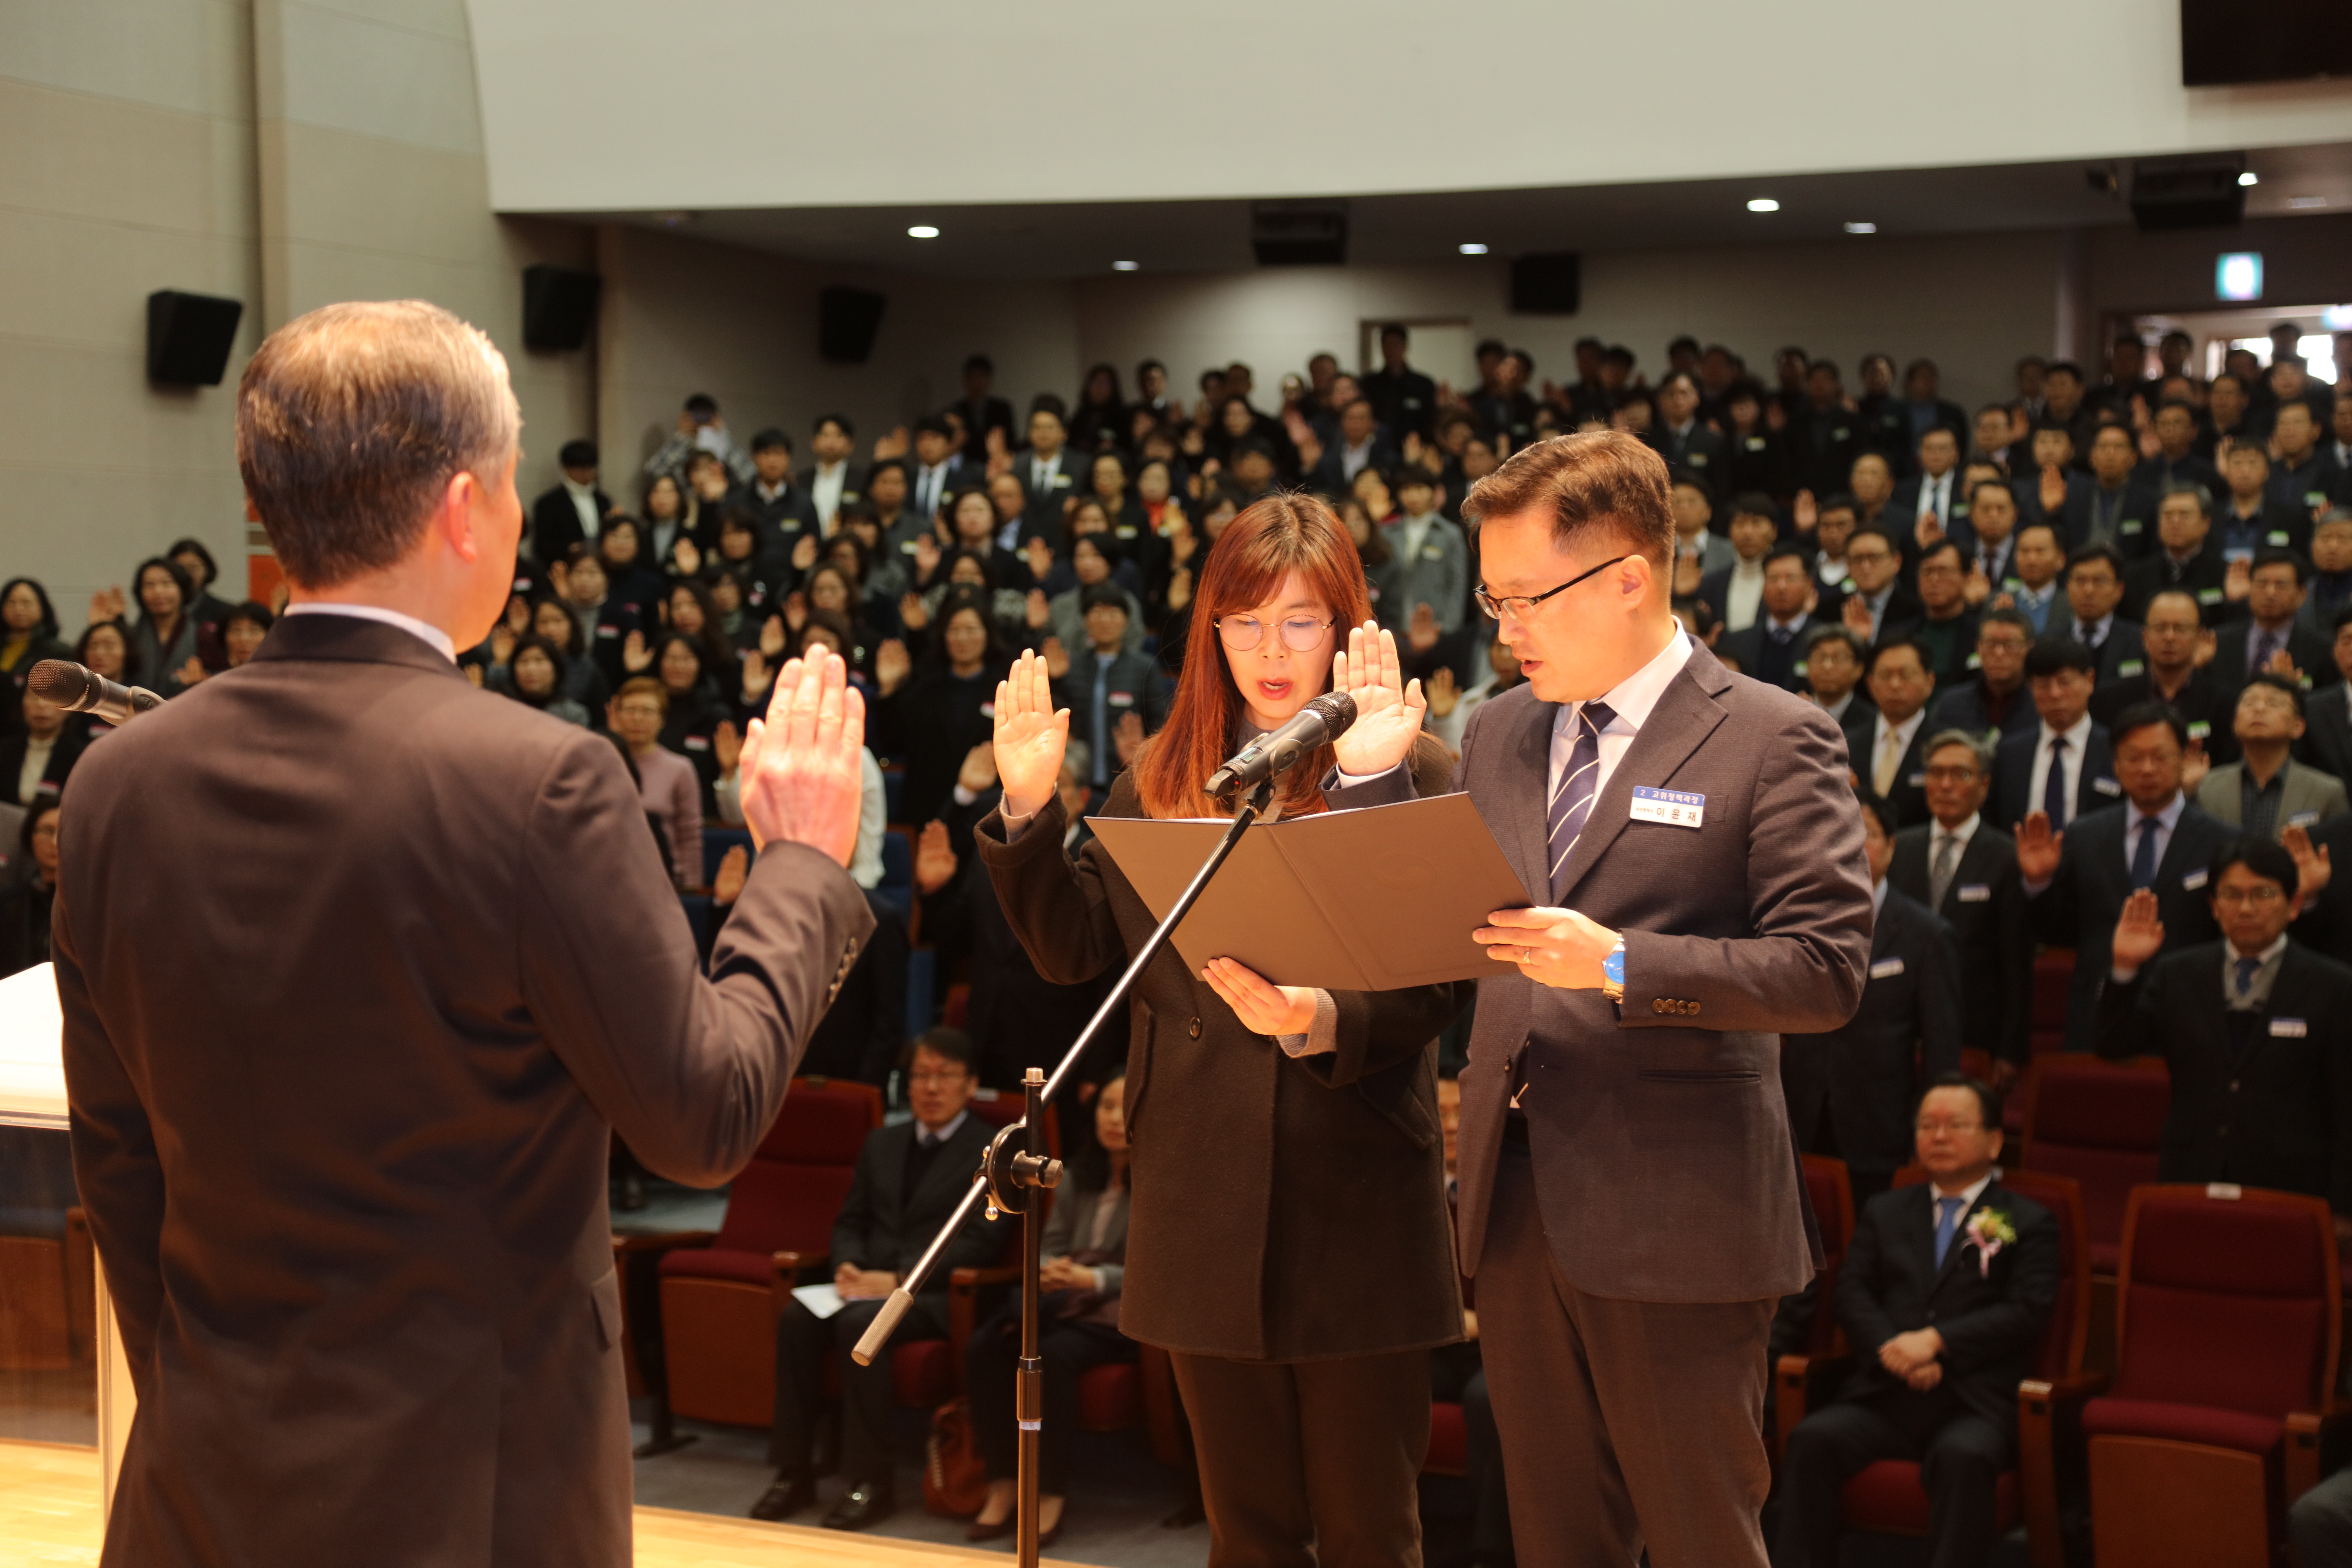 LOGODI welcomes 393 government officials for 10 months long-term programs 큰 이미지[마우스 클릭 시 창닫기]